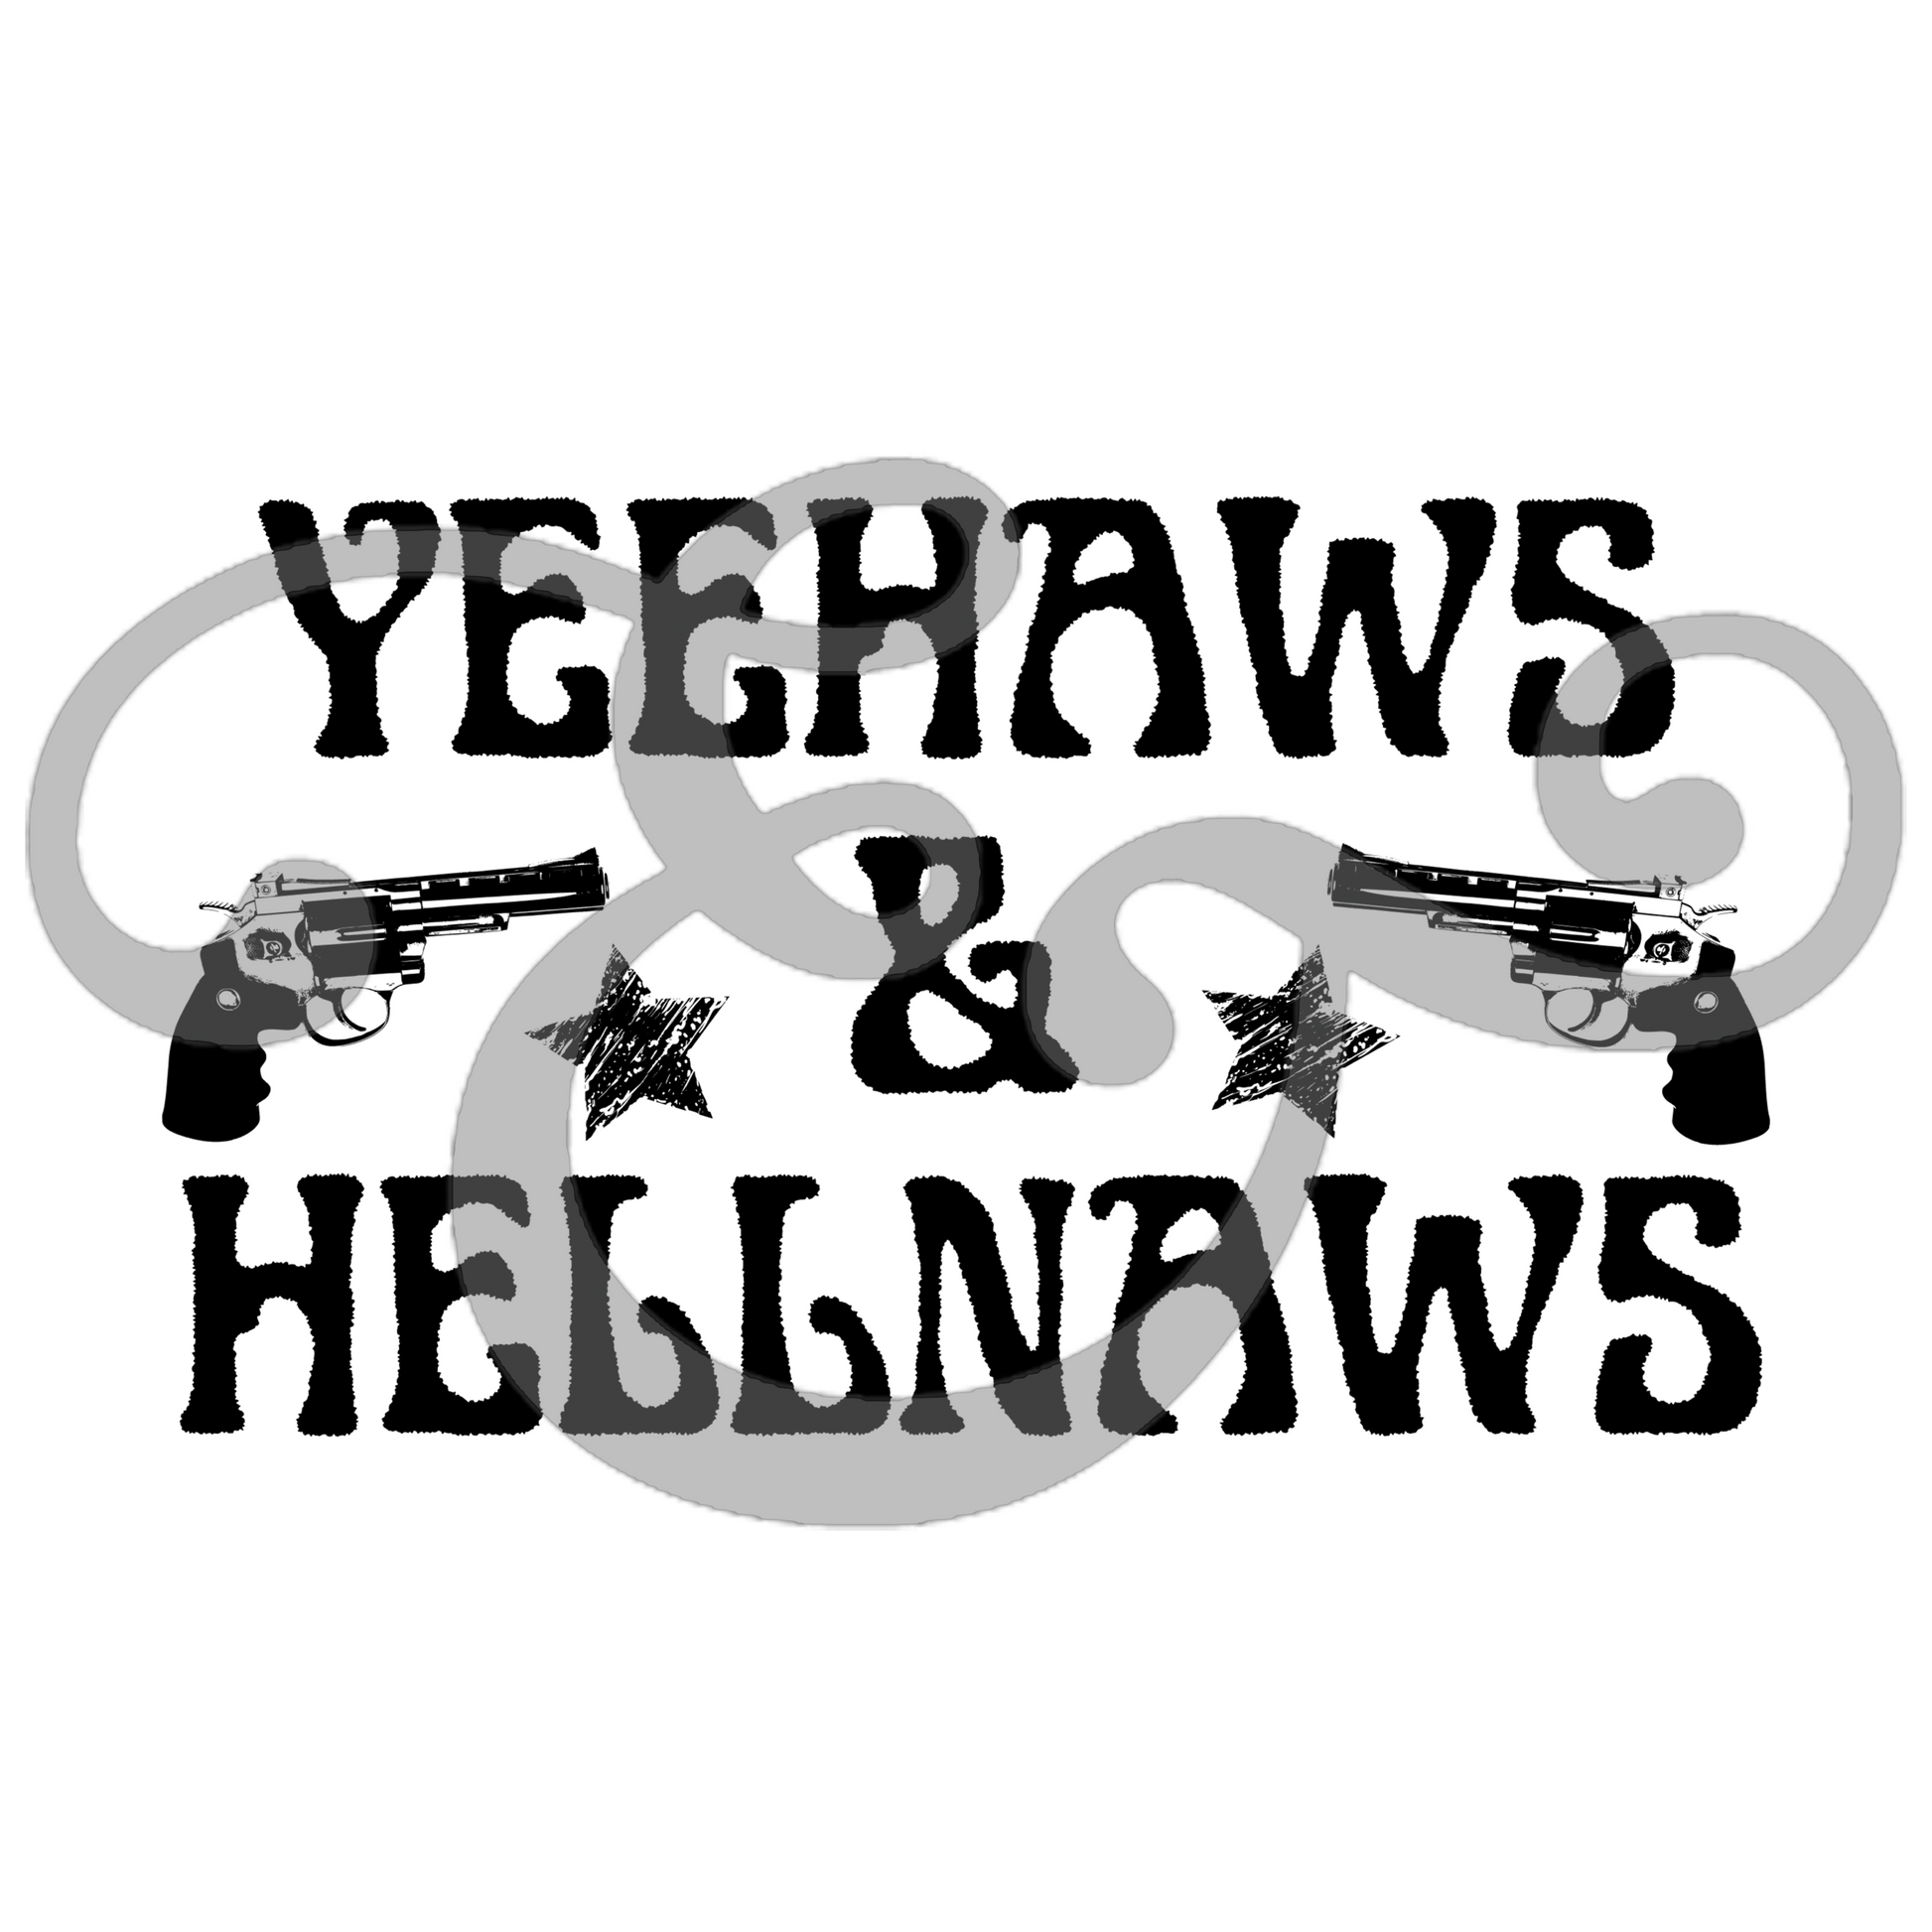 Yeehaws And Helloaws Sublimation Transfer (6762841047118)